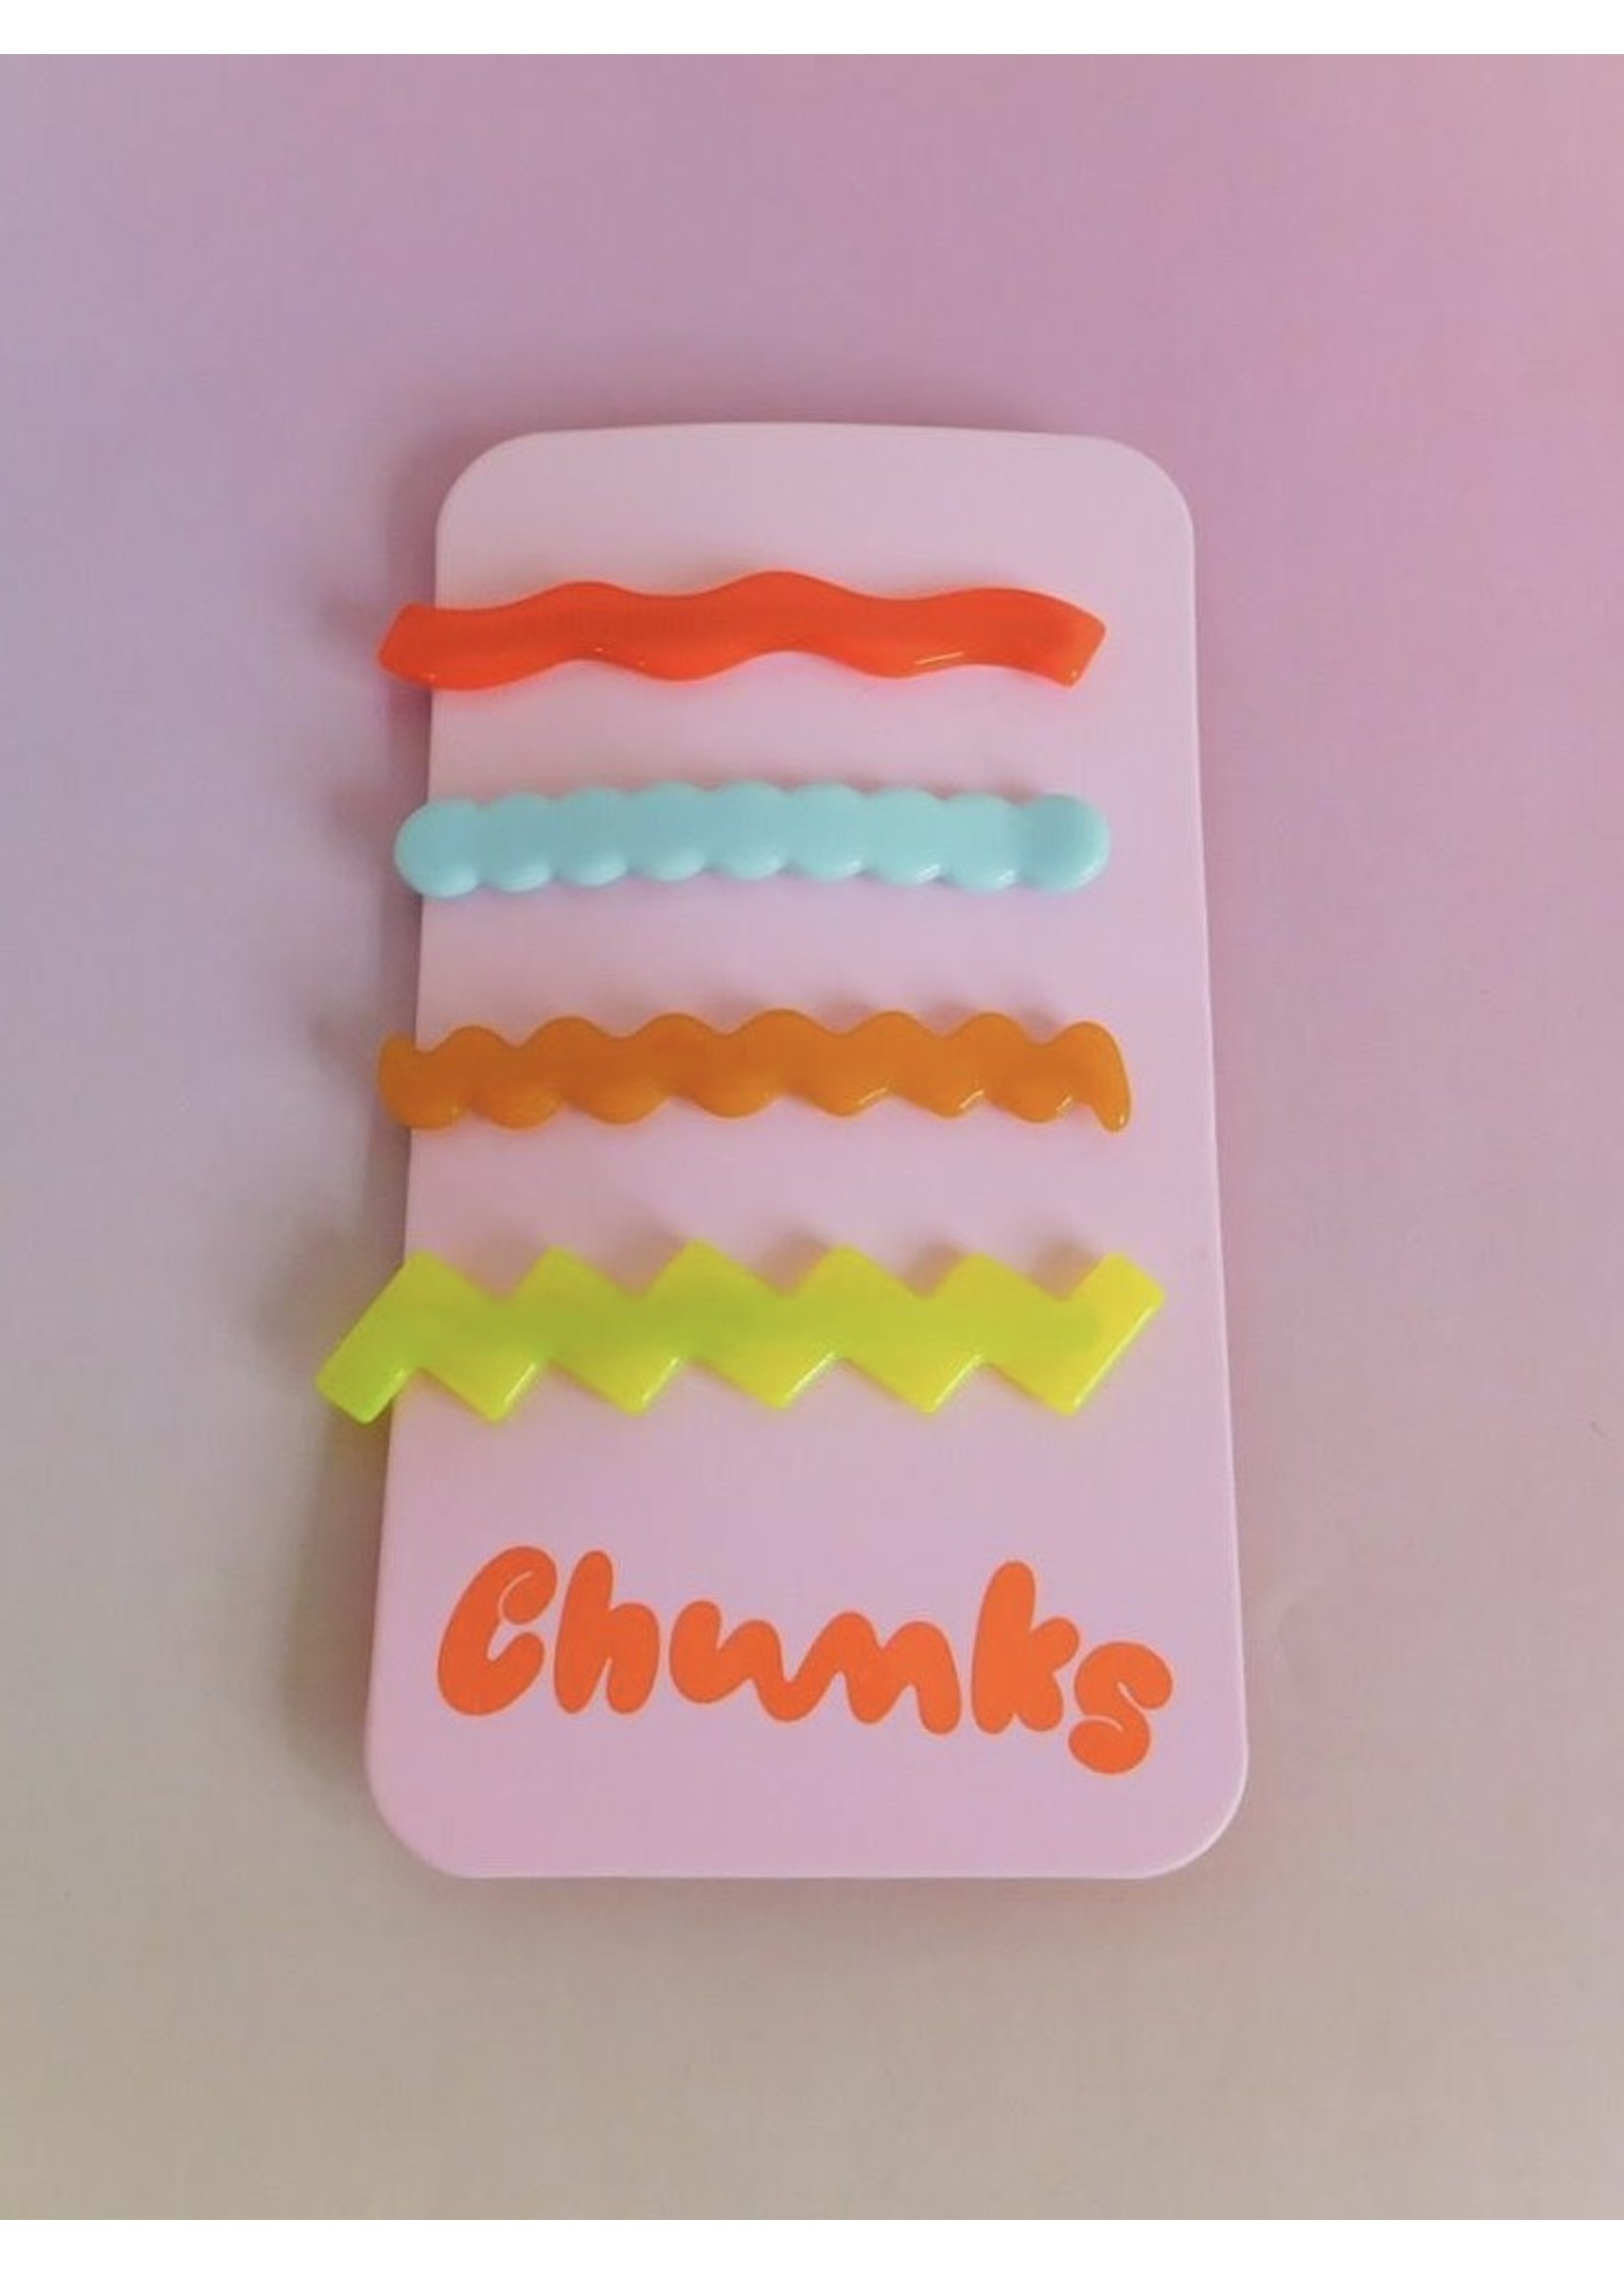 Chunks "Lines Slides" Pack of Barrettes by Chunks